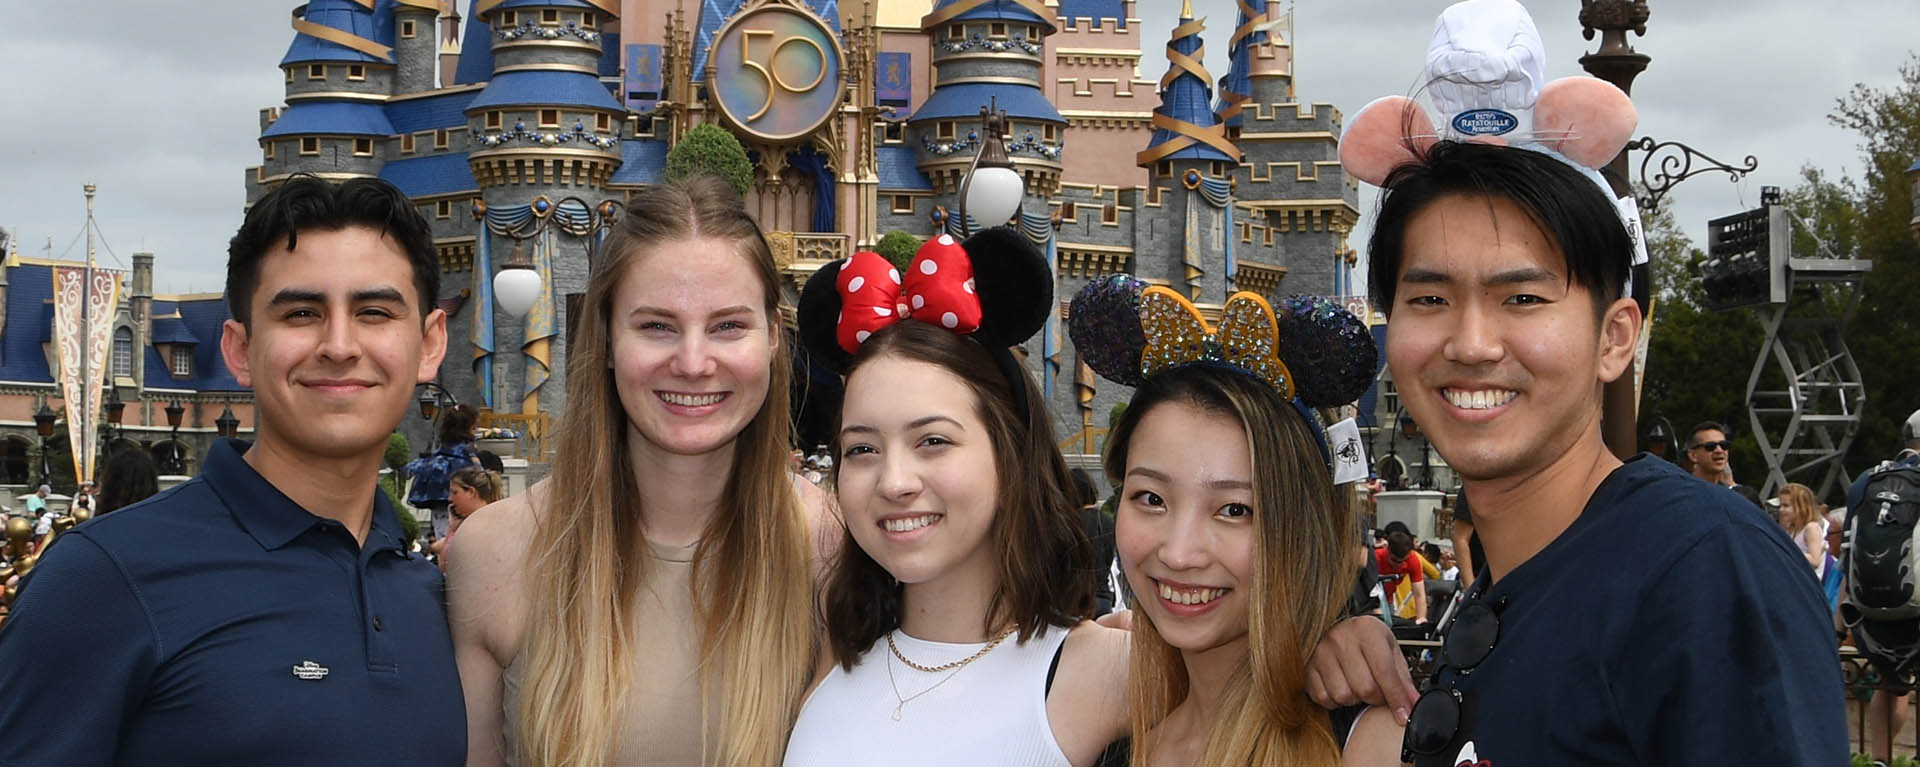 Students at Disney on an advertising trip.